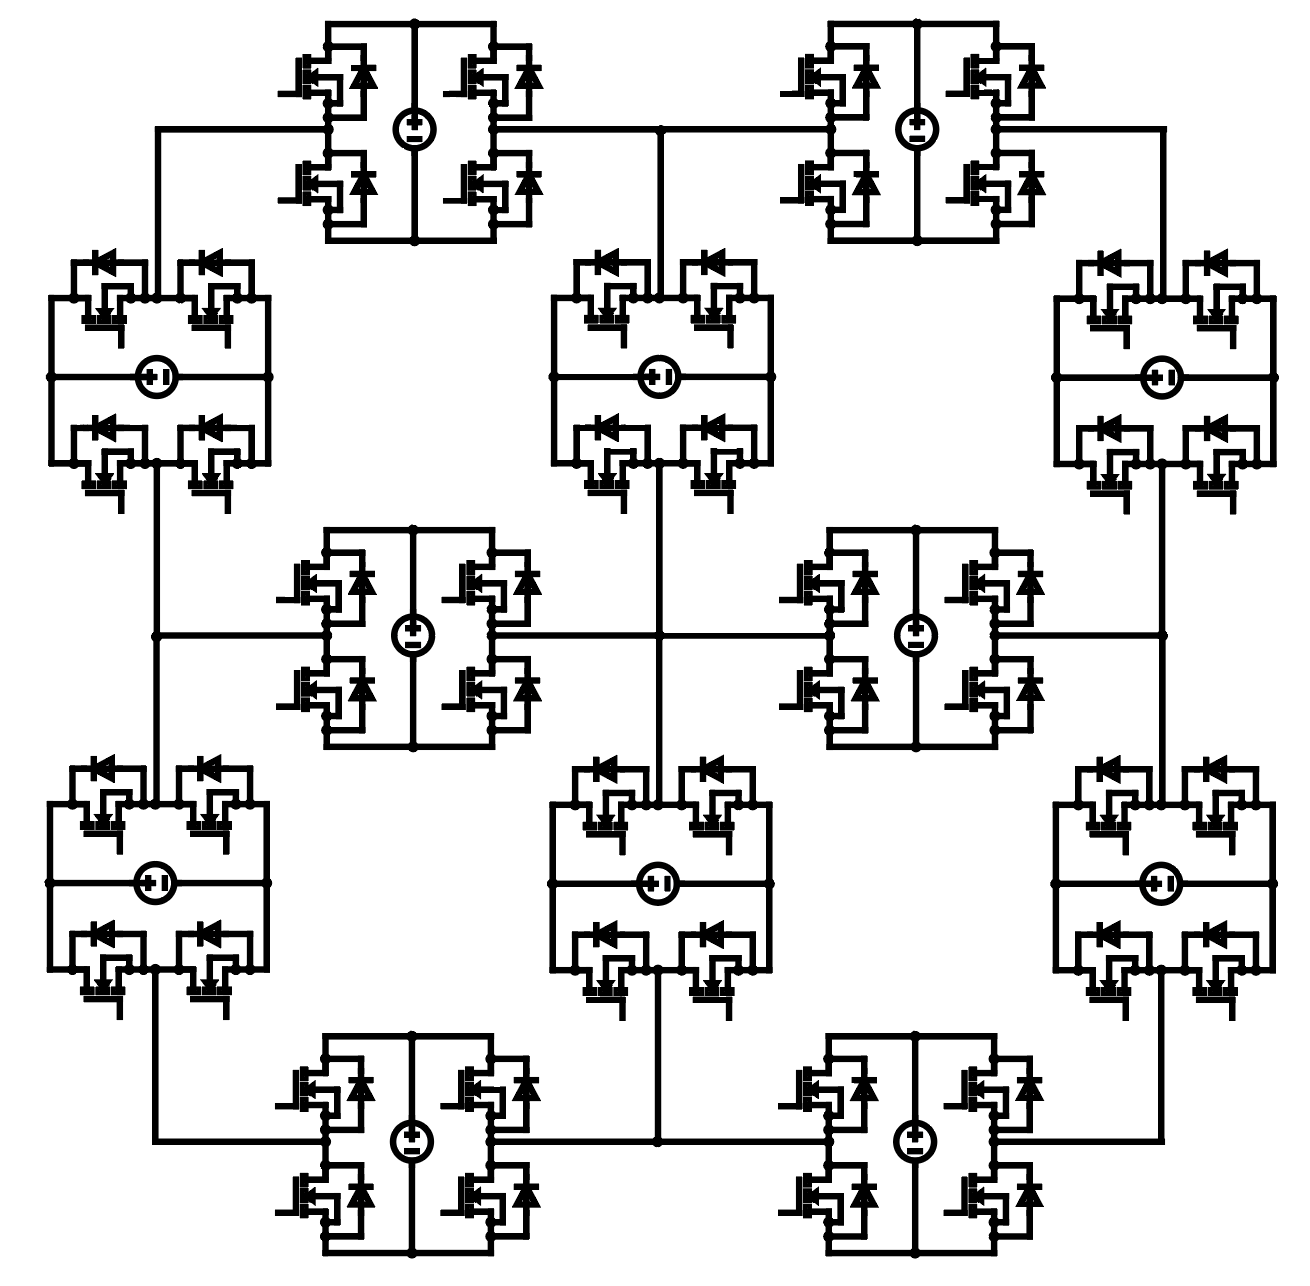 3x3wiring.png